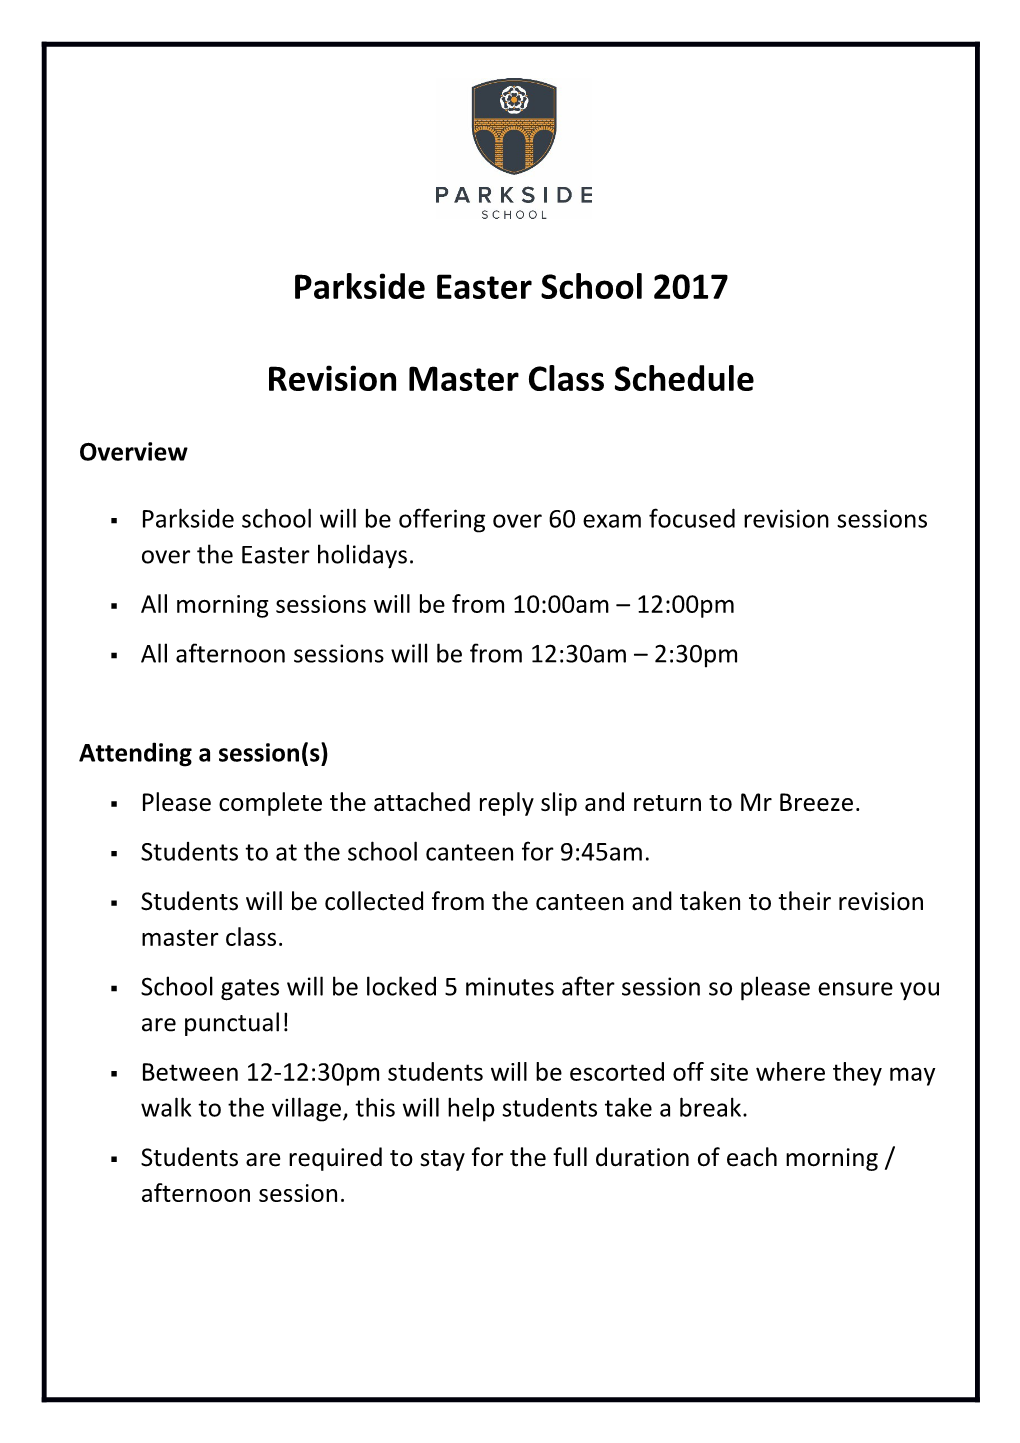 Revision Master Classschedule